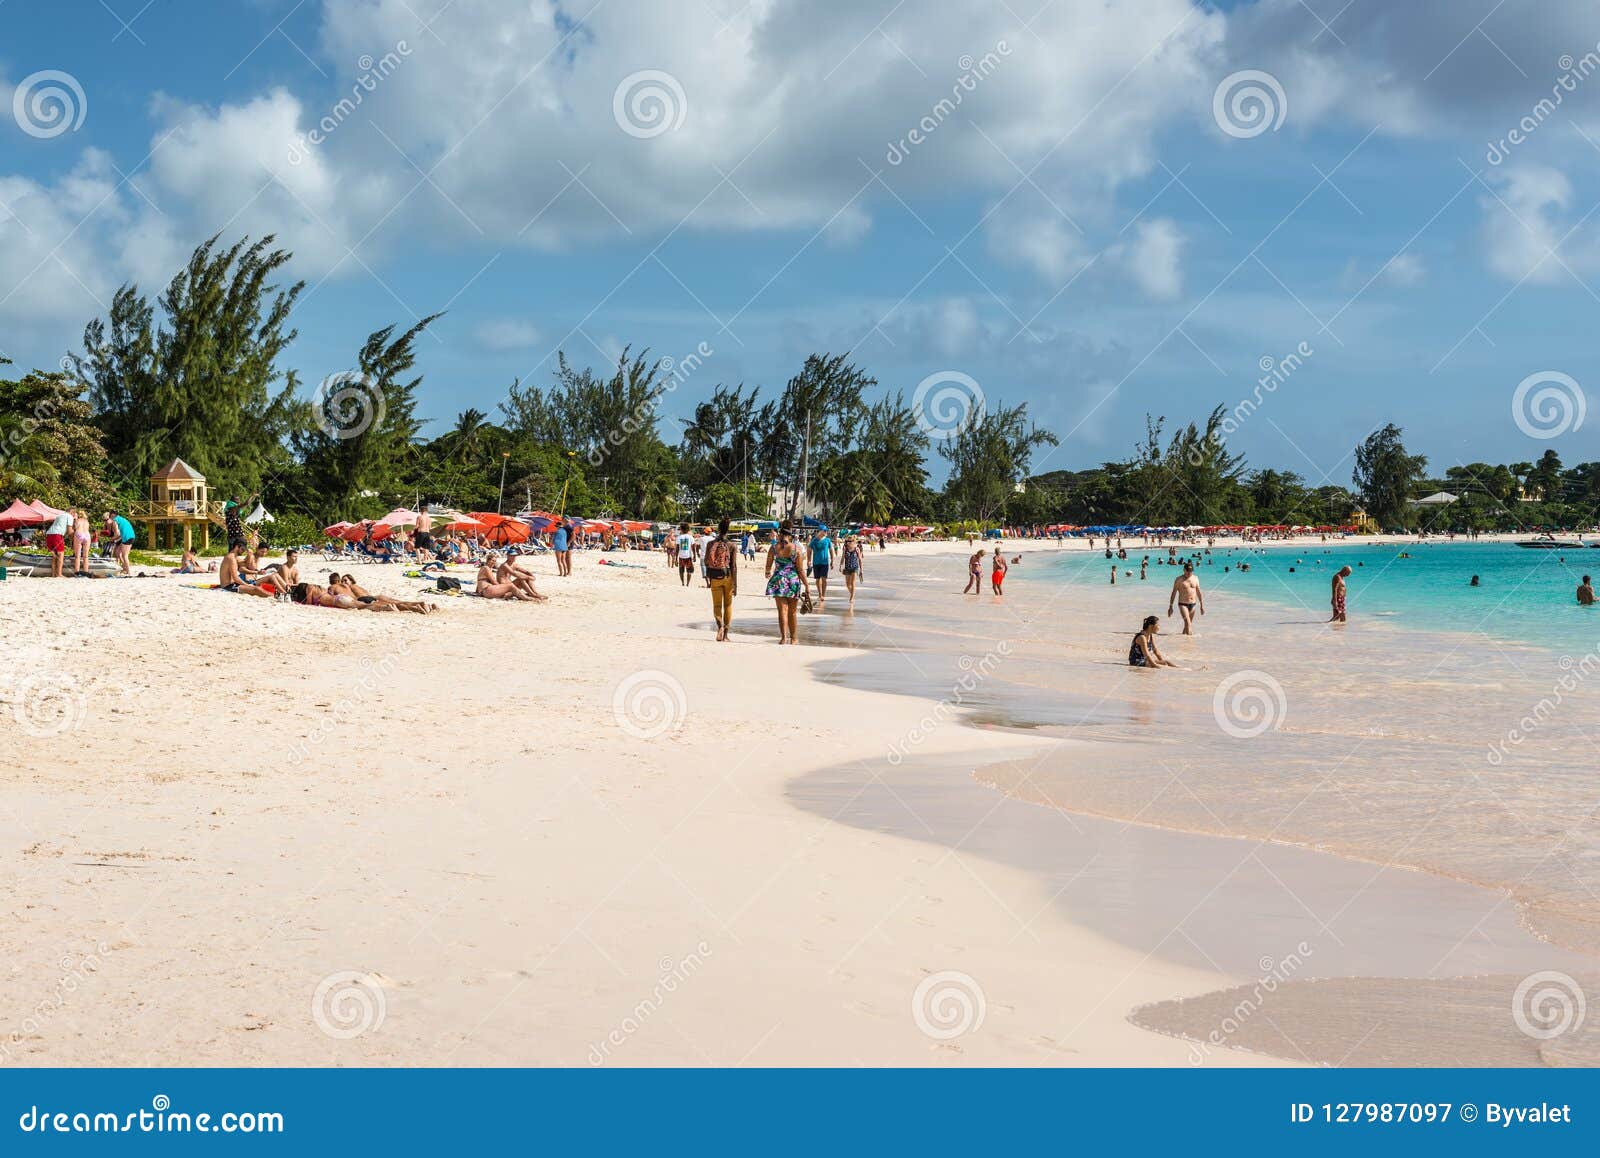 People Relaxing On The Brownes Beach In Barbados Editorial Photography Image Of Indies Summer